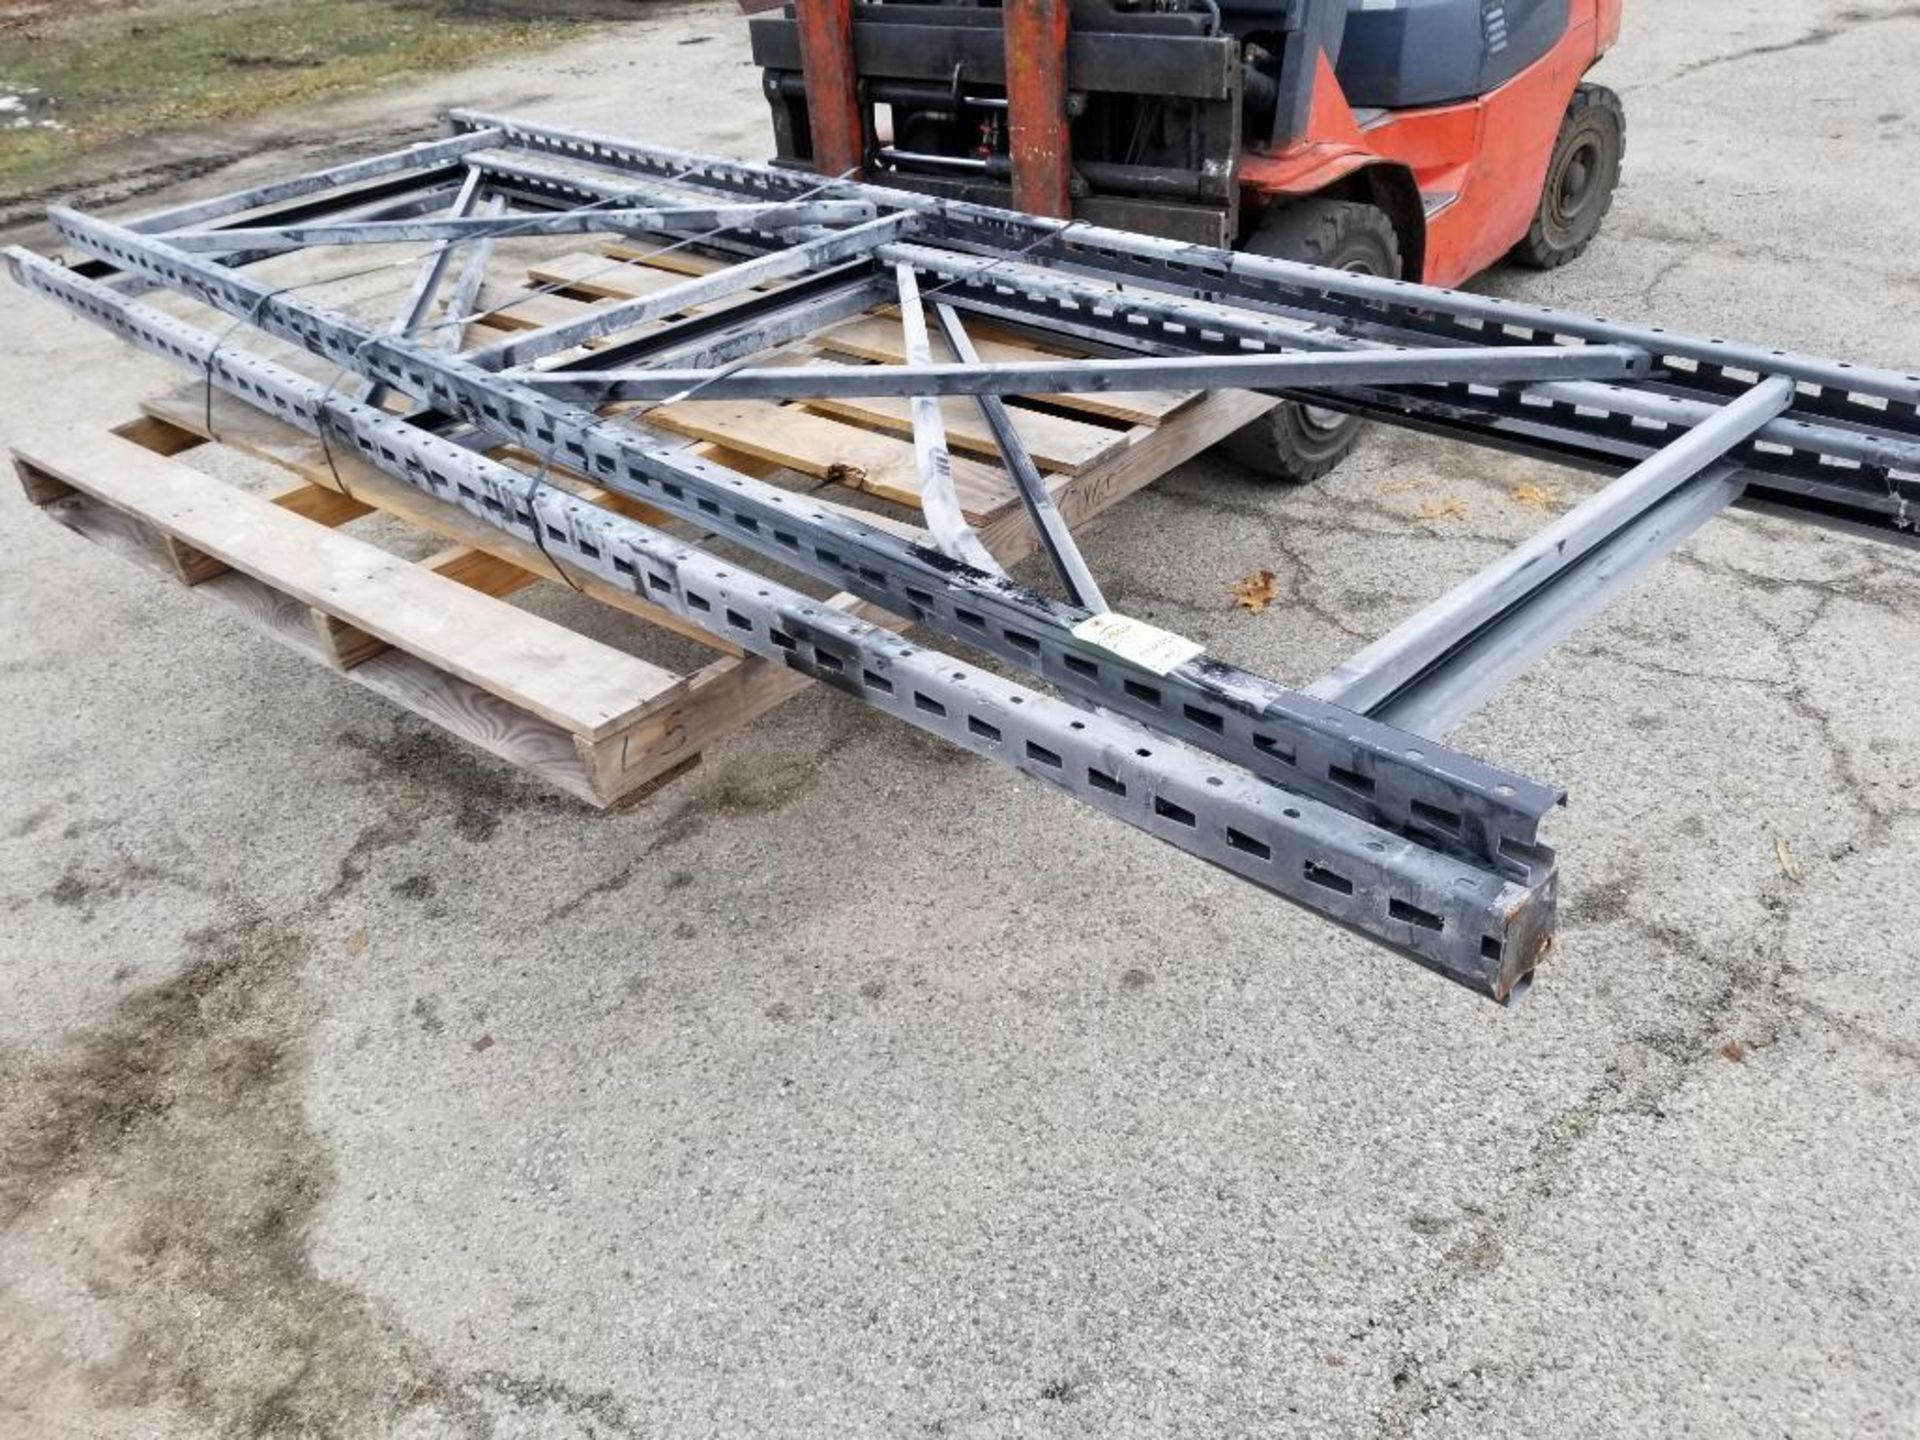 Qty 3 - Pallet racking uprights. 144in tall x 42in wide.